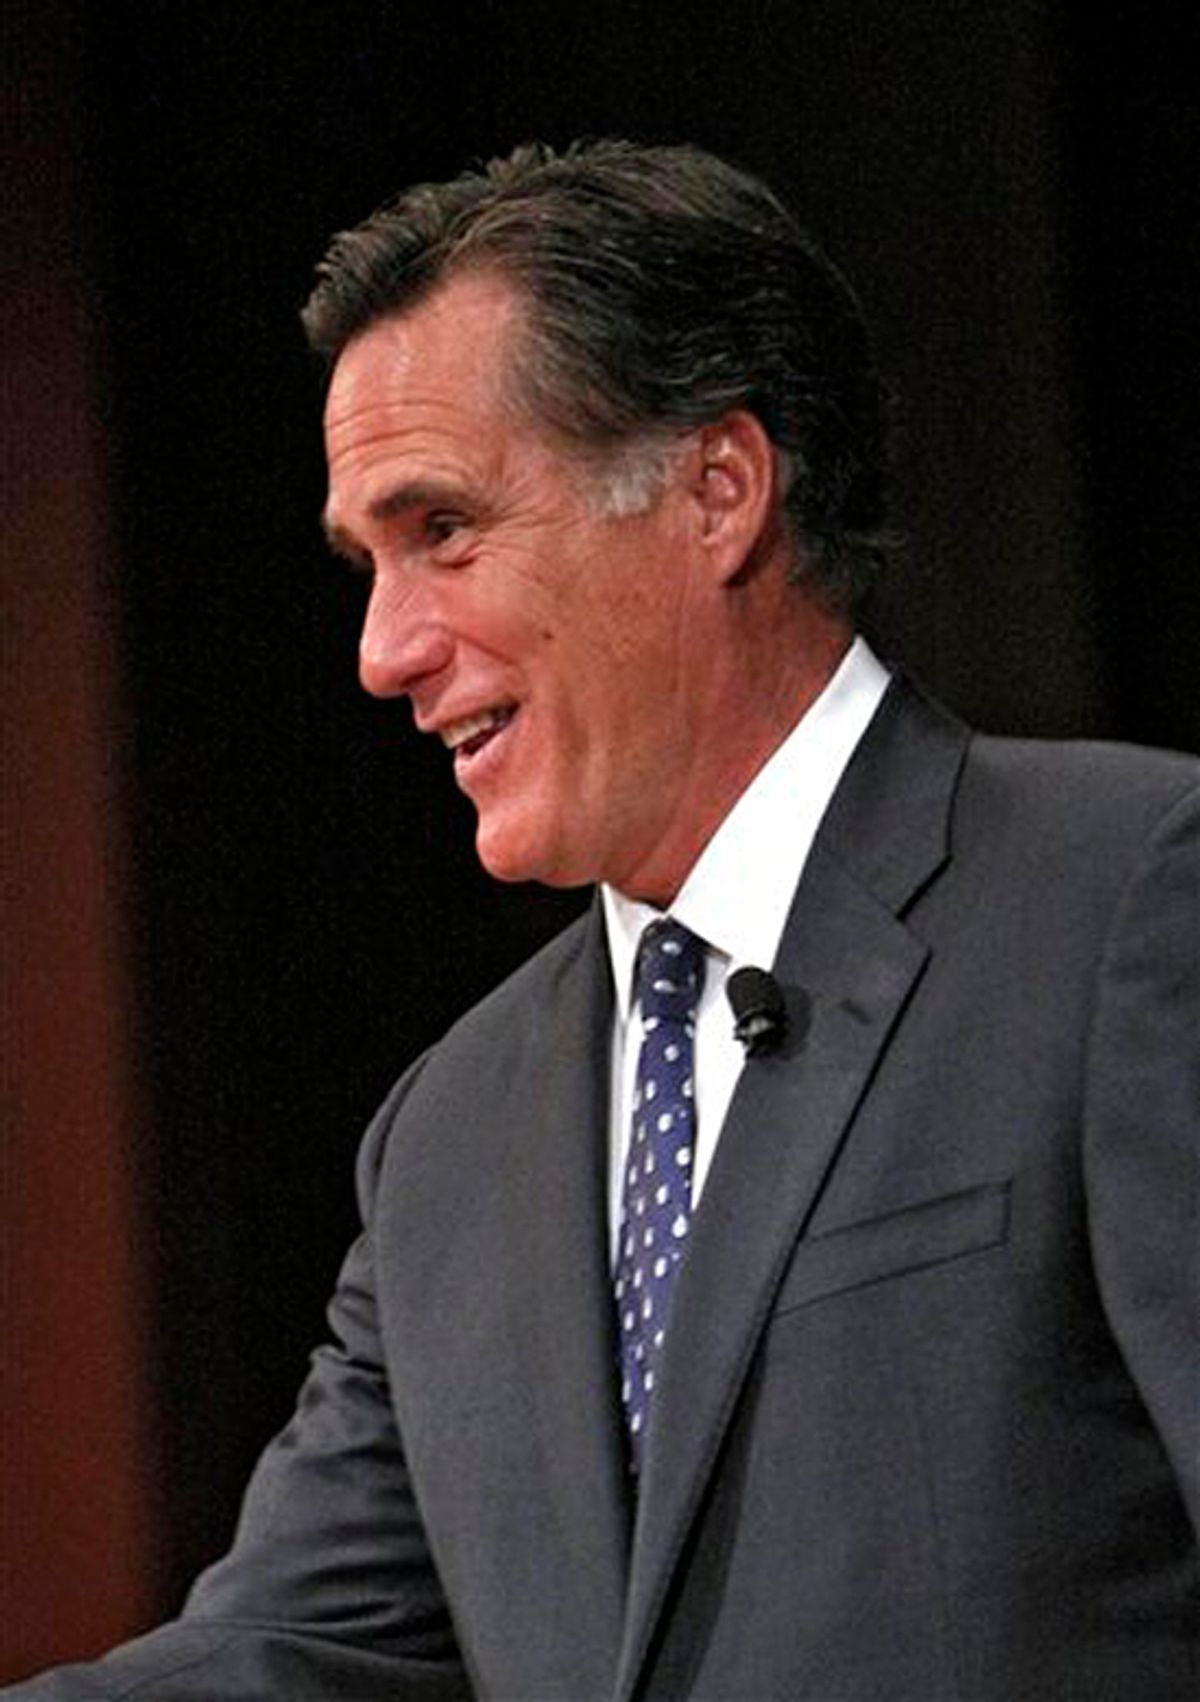 Former Massachusetts Governor Mitt Romney points to a friend in the audience before speaking in the Chase Auditorium in Chicago on Wednesday,  March 24, 2010. (AP Photo/Charles Cherney) (Charles Cherney)